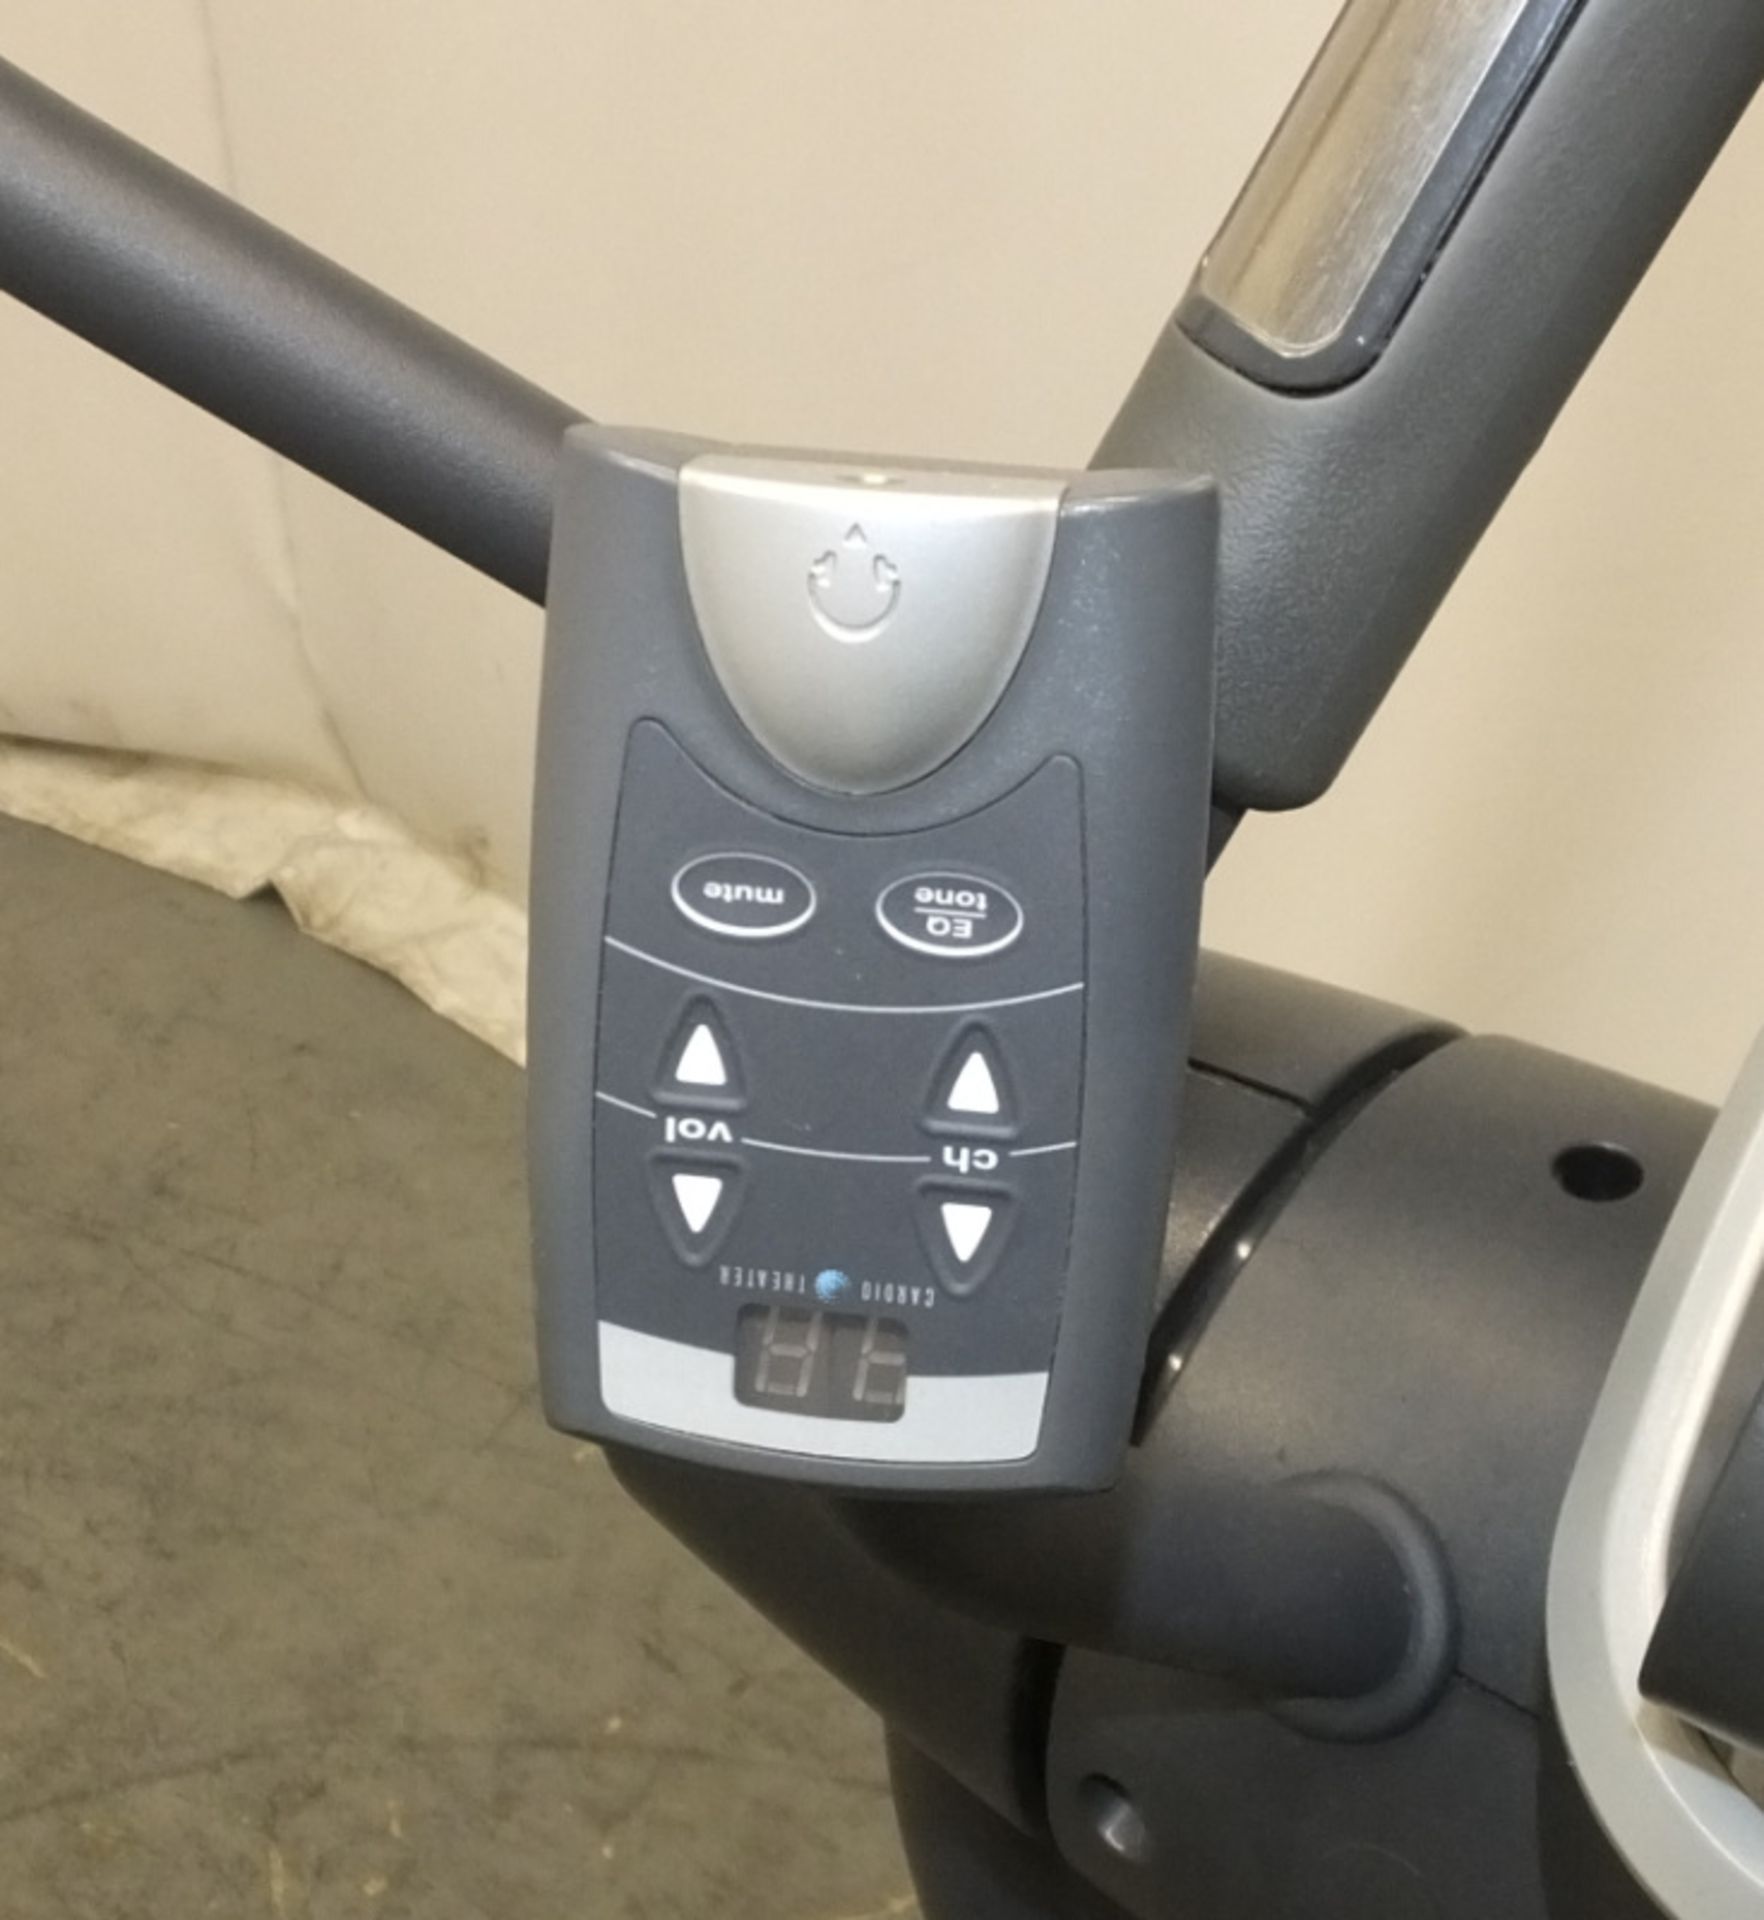 Life Fitness 95x Elliptical Cross Trainer - Badly damaged to right arm section as seen in - Image 12 of 17